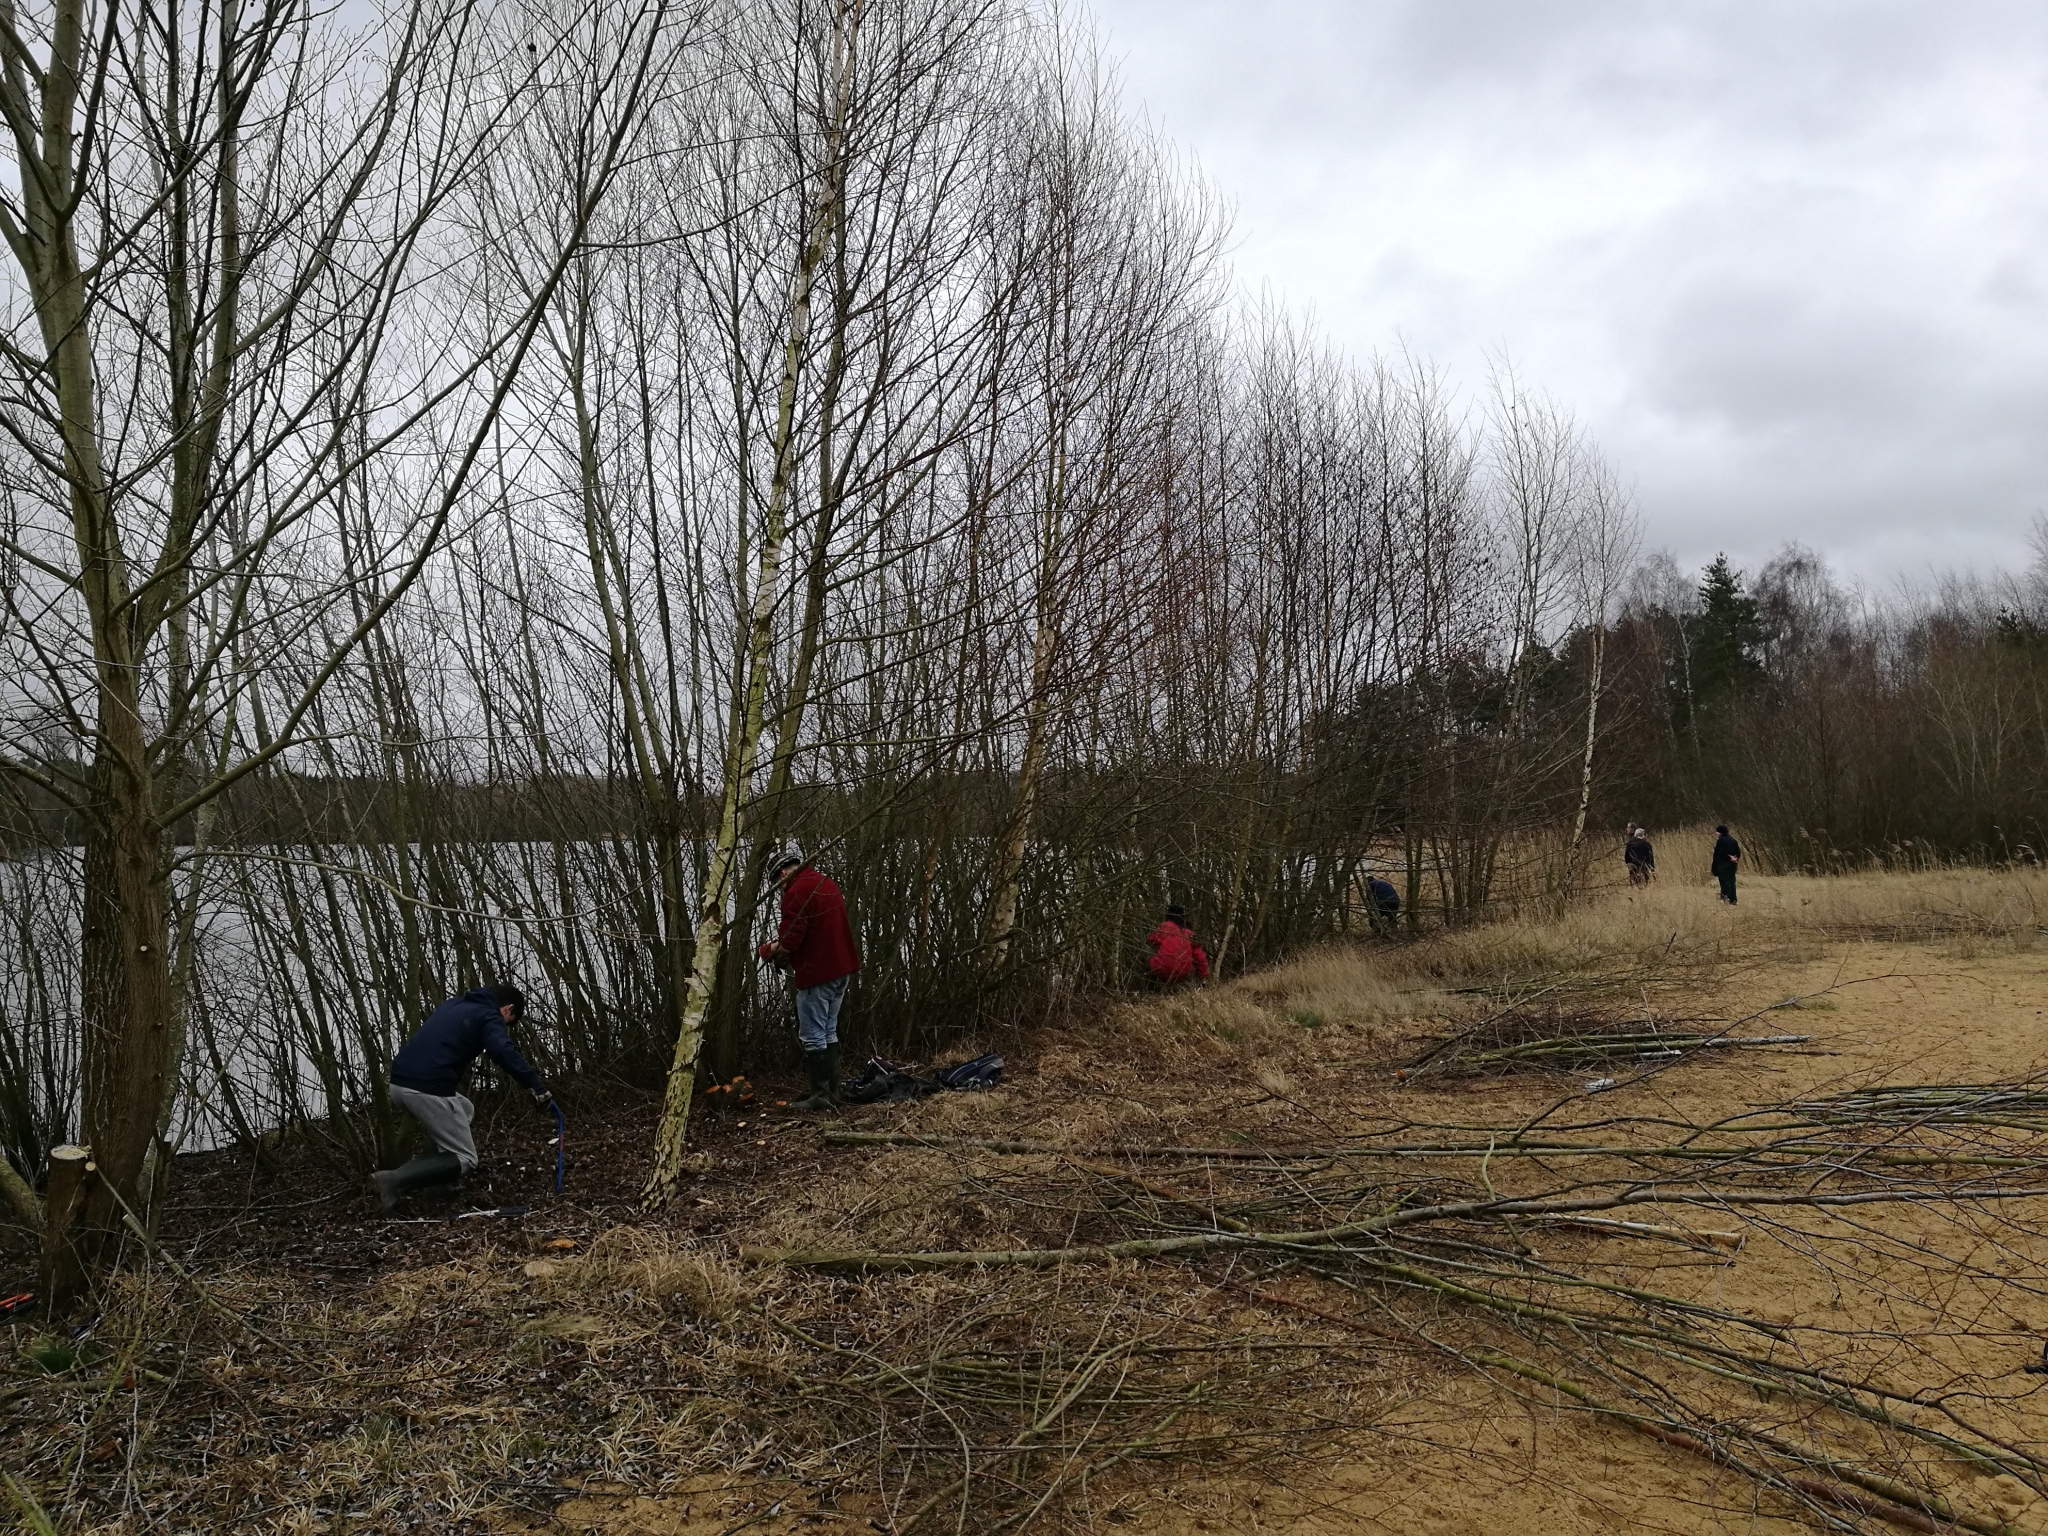 A photo from the FoTF Conservation Event - February 2022 - Clearing overgrowth at Lynford Water : Volunteers work by the waters edge amongst the Willow trees